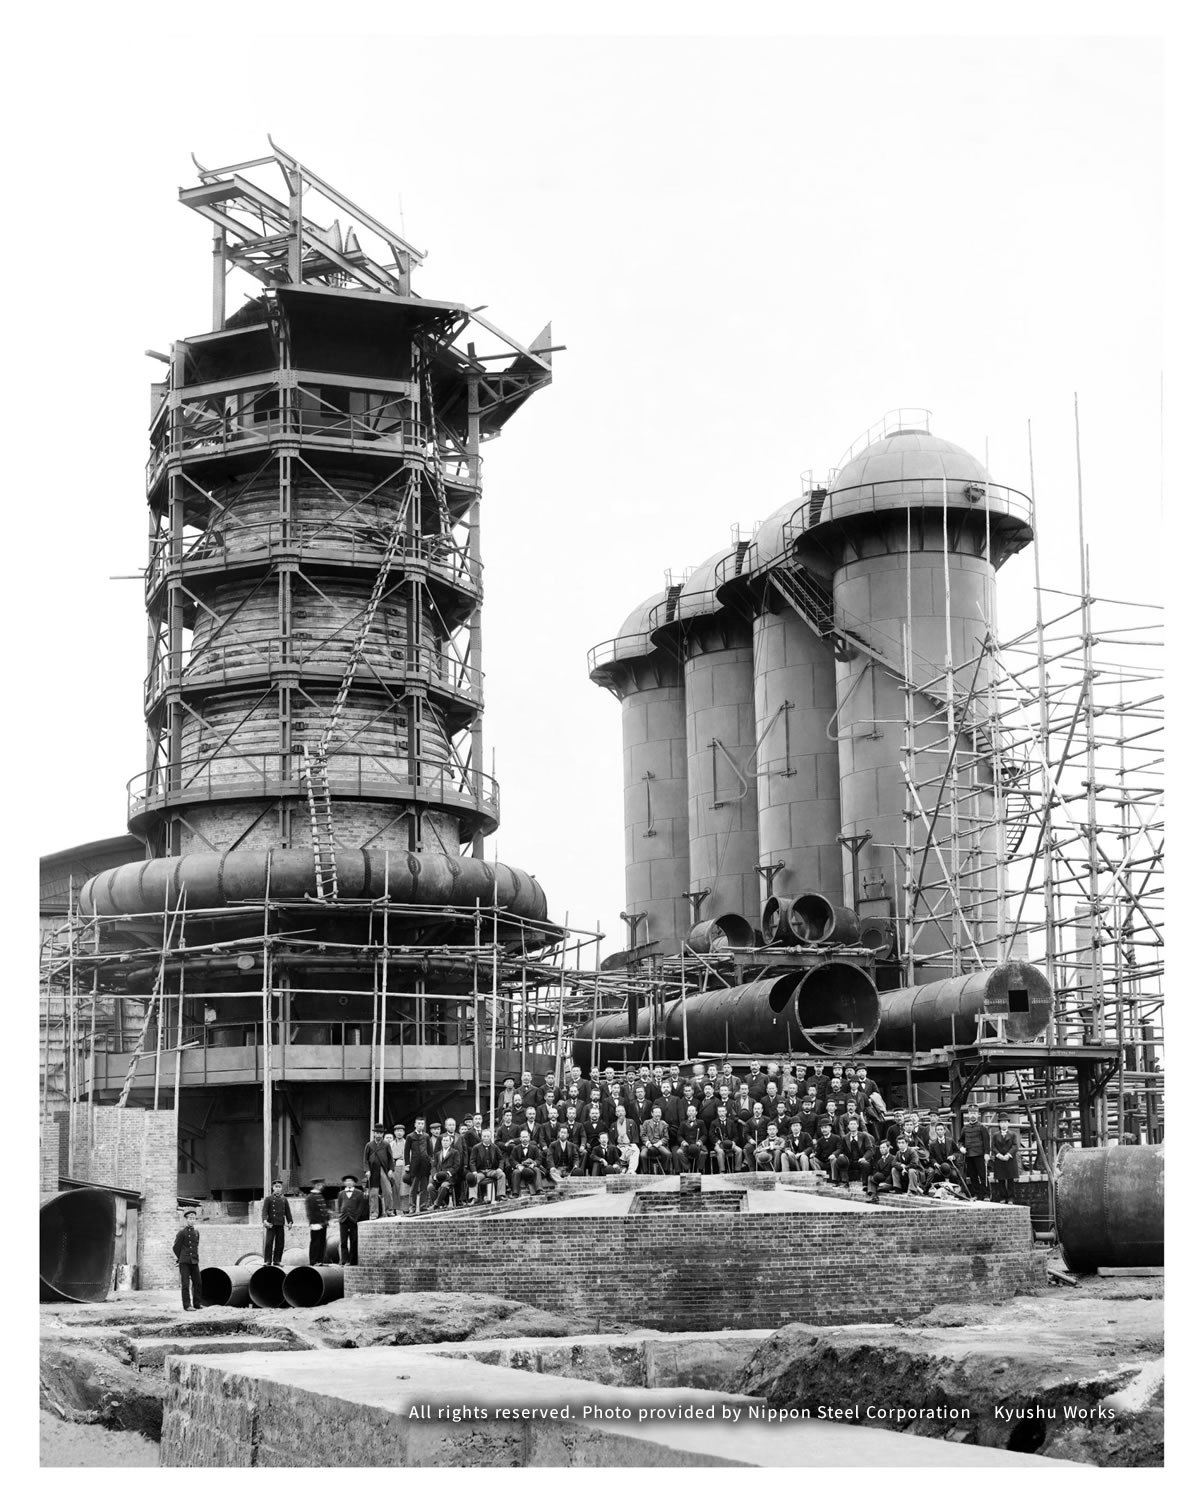 VIPs Who Visited the No.1 Blast Furnace as it Neared Completion (1900)